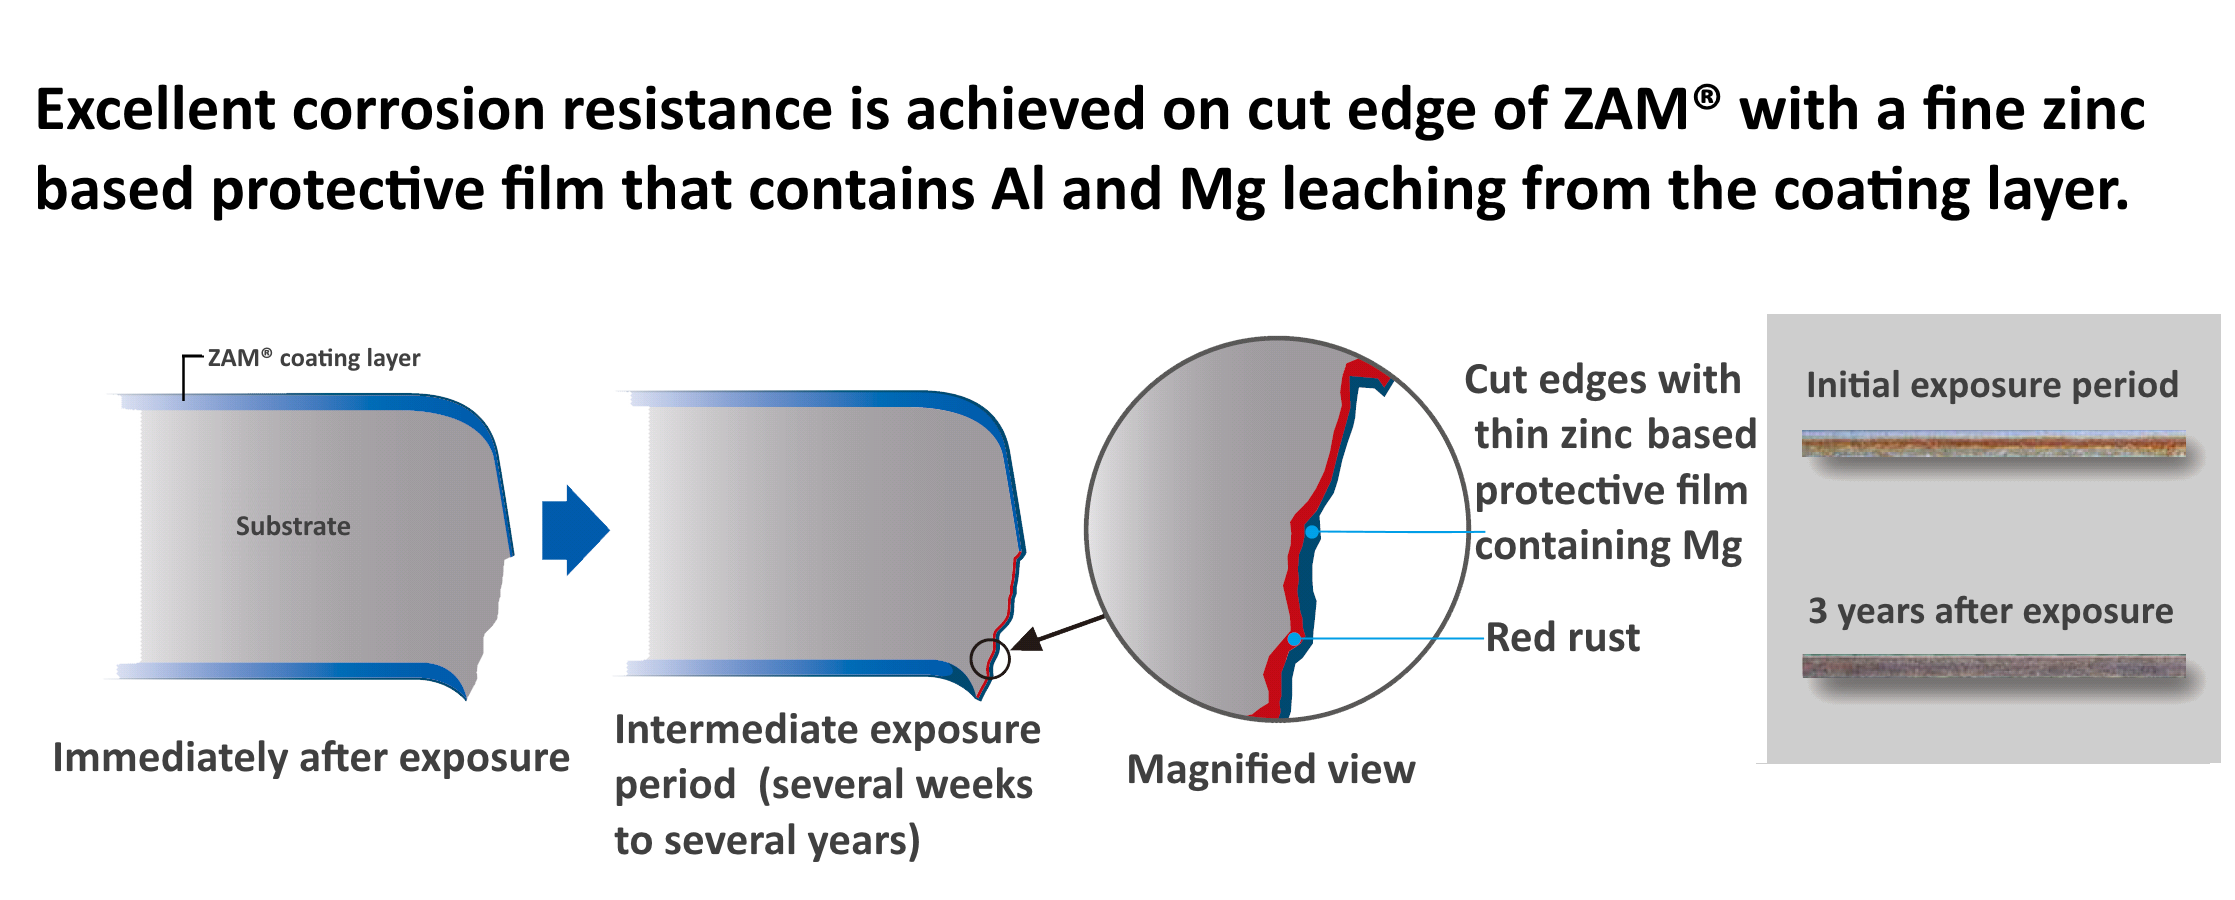 Illustration of excellent corrosion resistance achieved on cut edge of ZAM